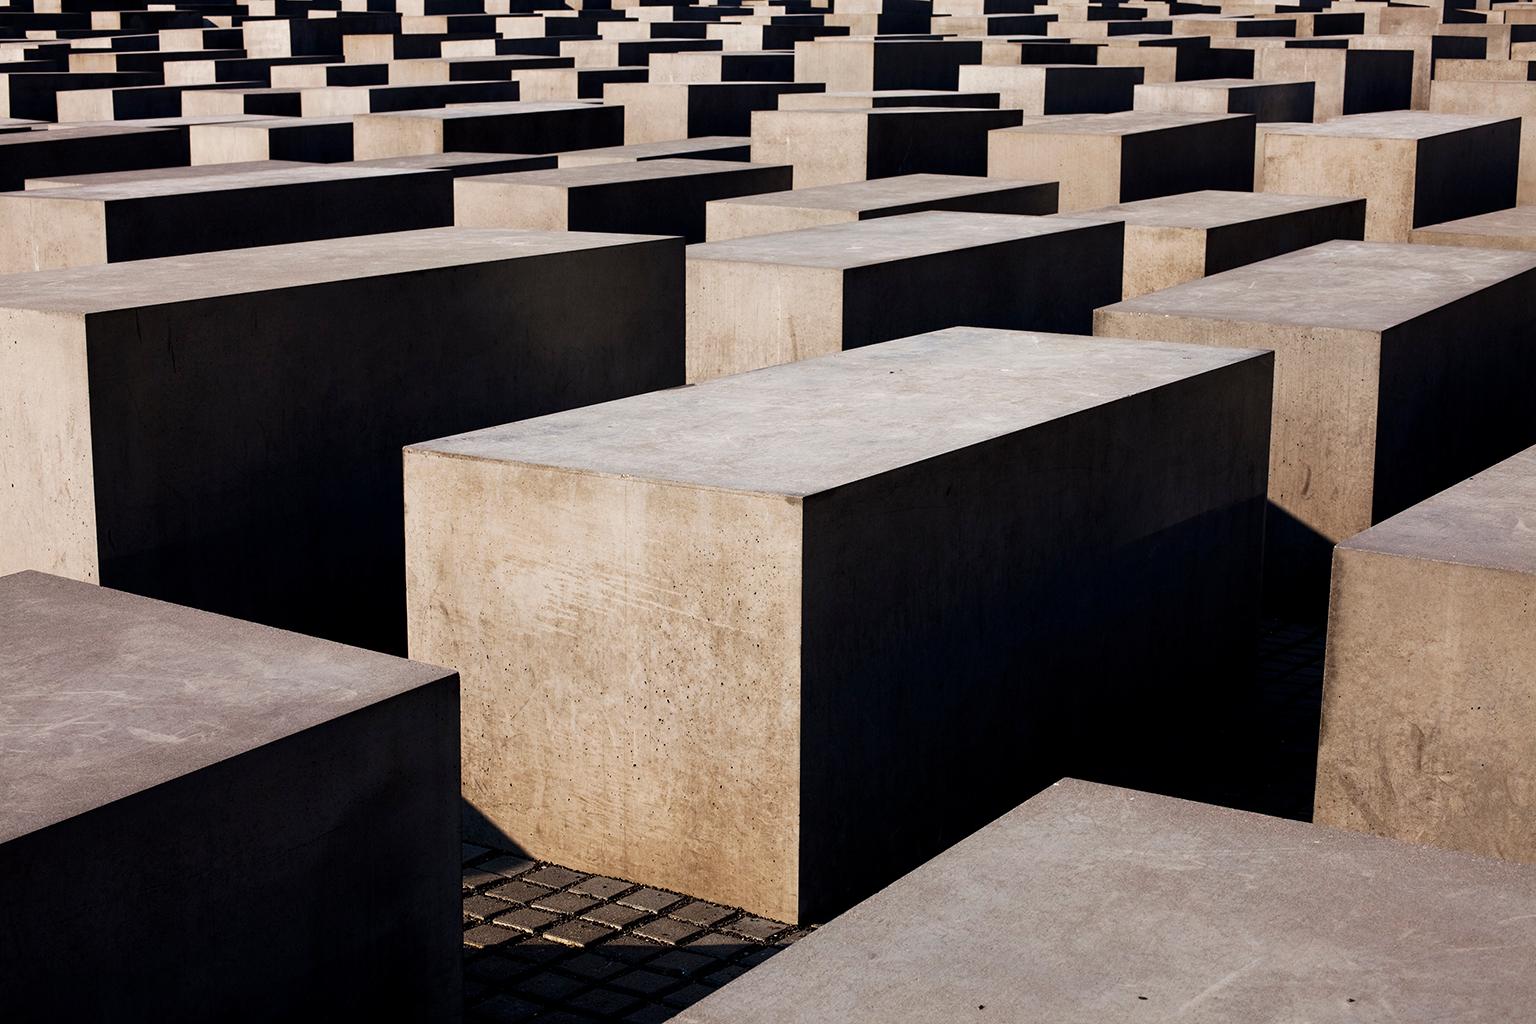  Cosmo Condina Landscape Photograph - " Memorial III, to the Murdered Jews of Europe", Berlin Germany.